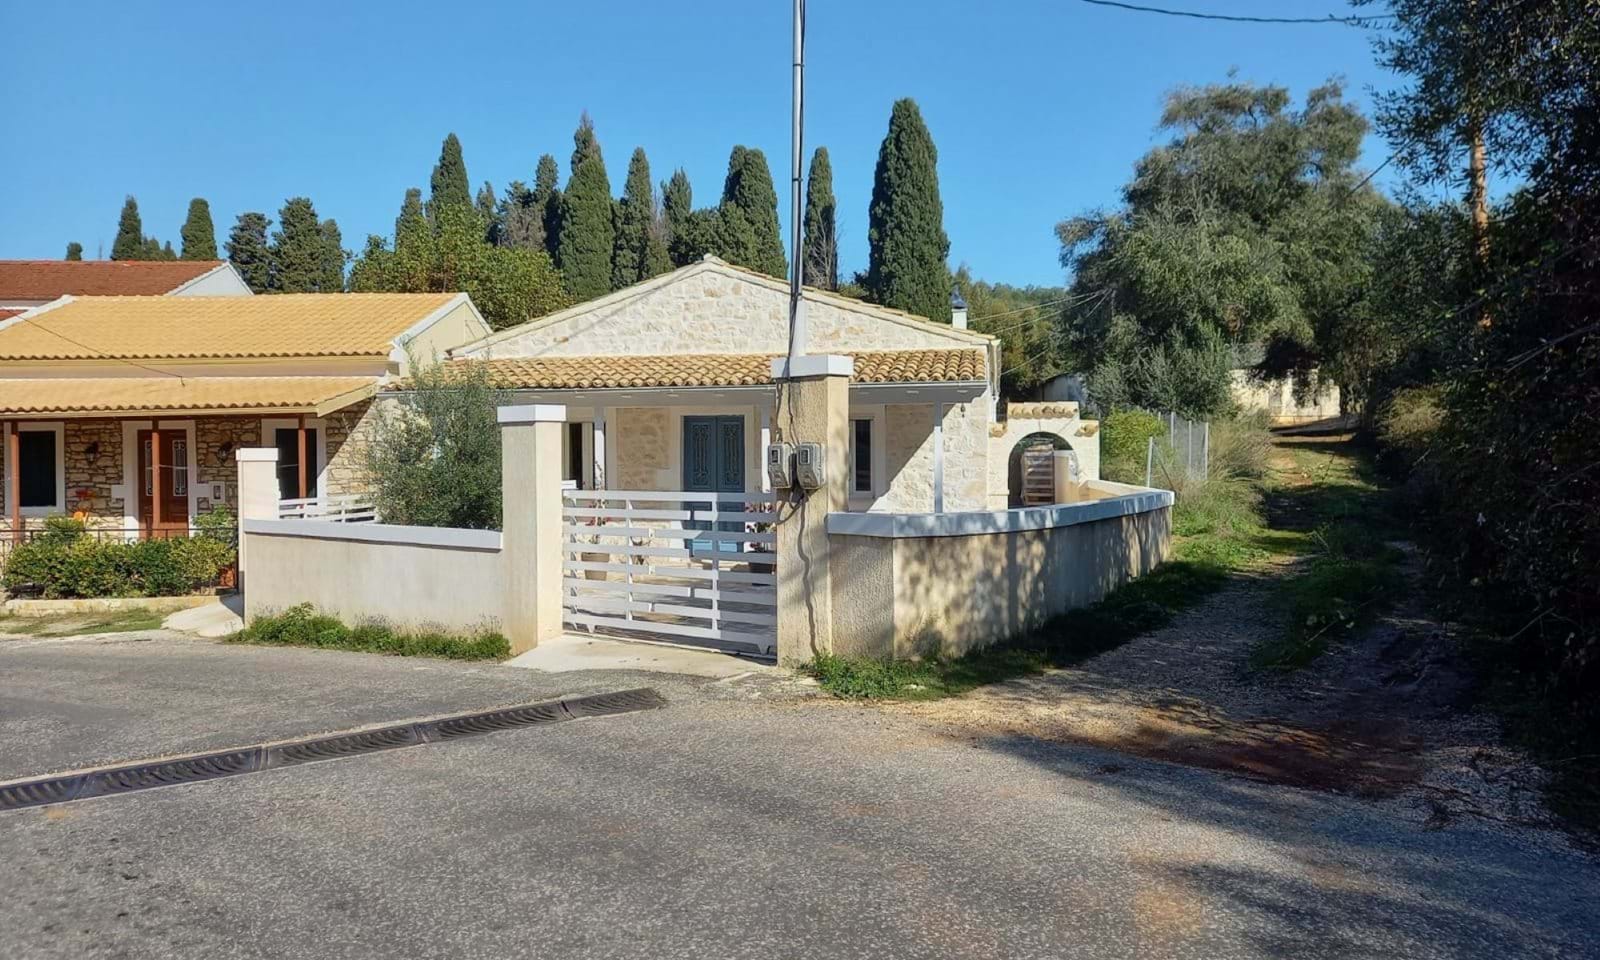 Lovely, modernised stone house in the village of Peritheia.